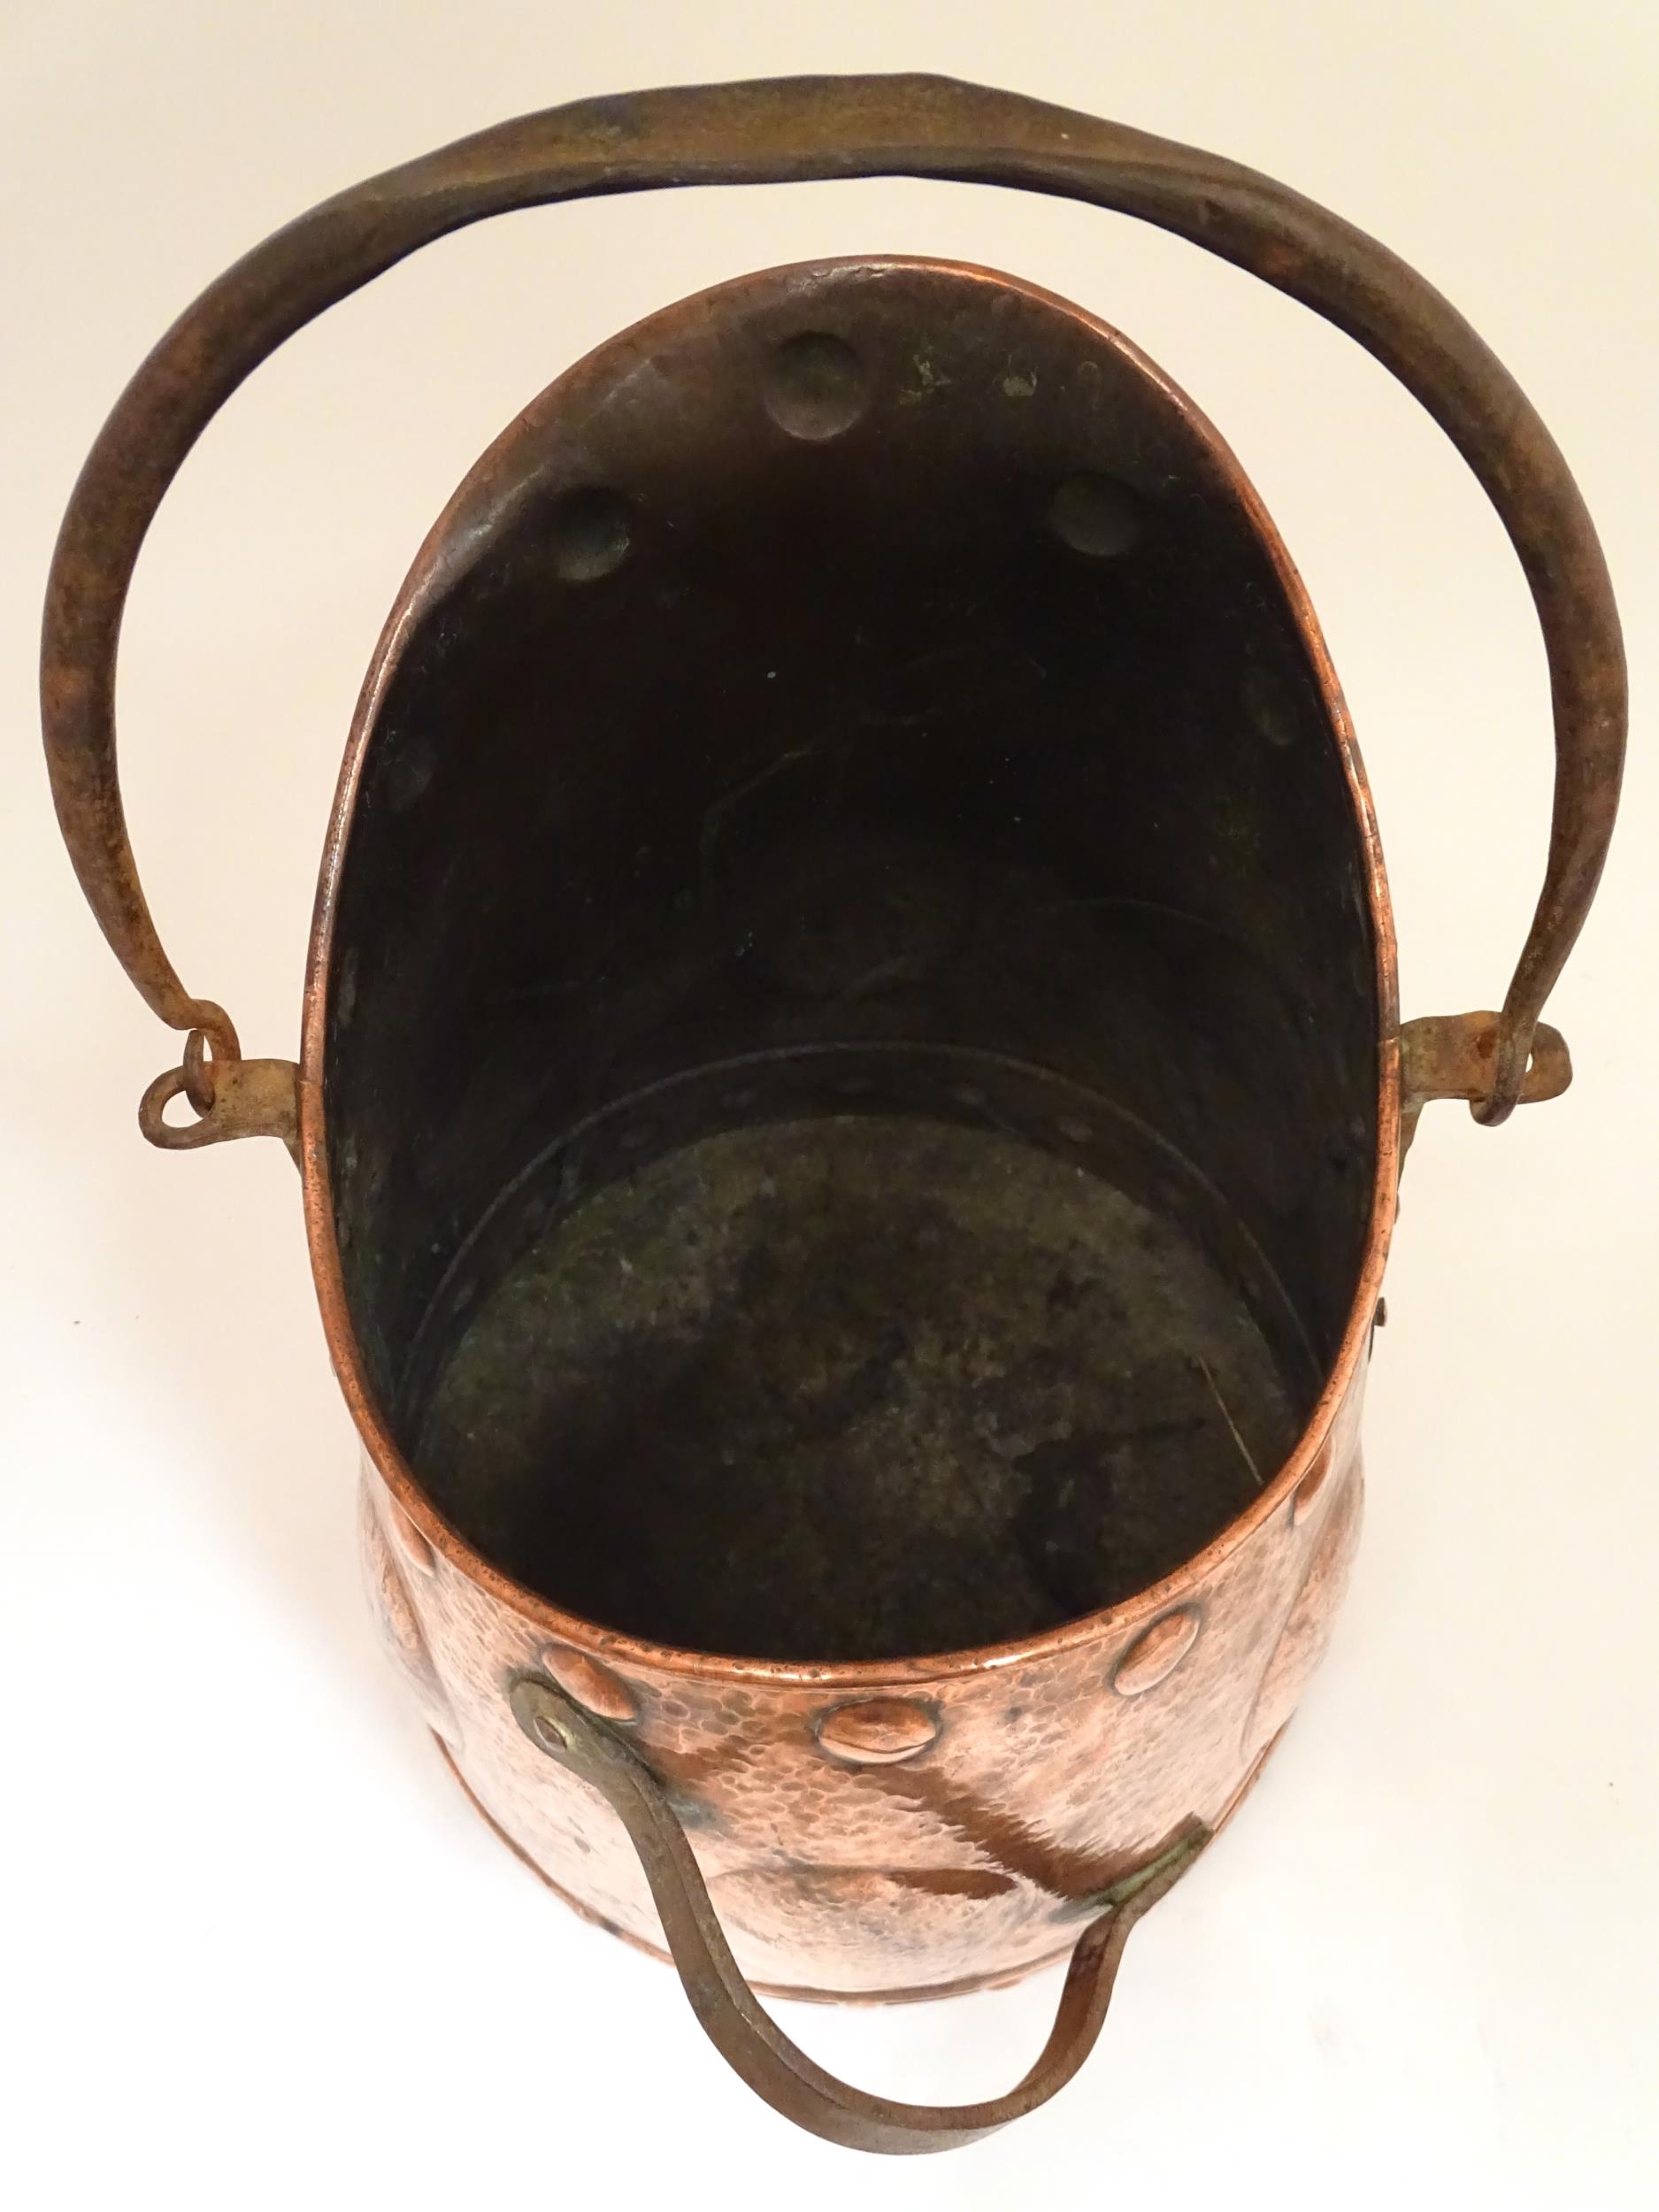 An Arts & Crafts cooper coal scuttle with swing handle and hammered decoration. Approx. 15 1/4" high - Image 6 of 6